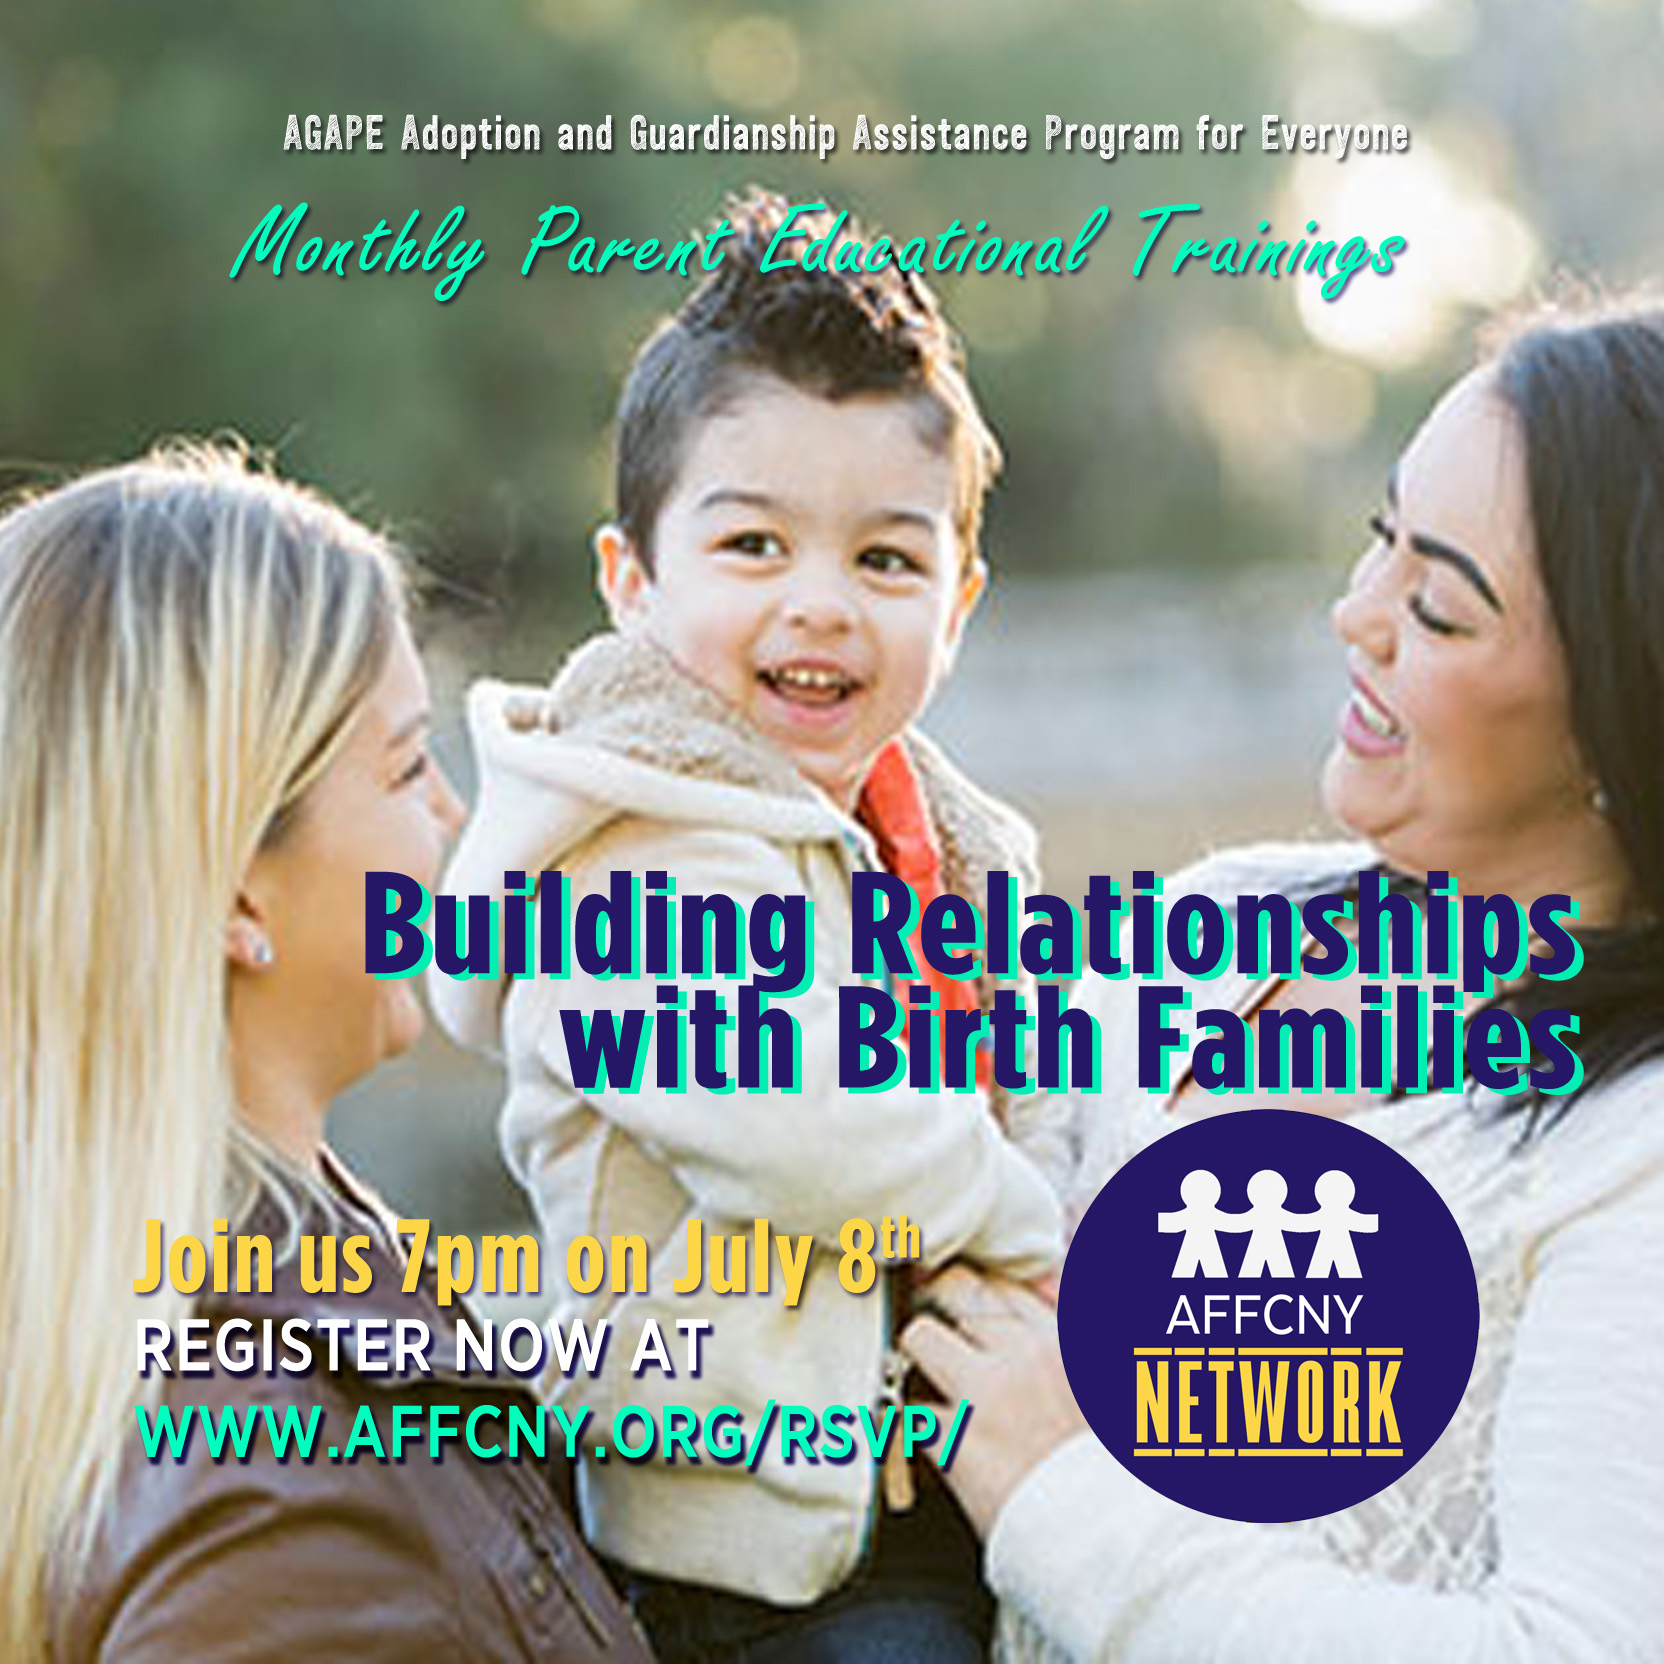 Building relationships with birth families trainings